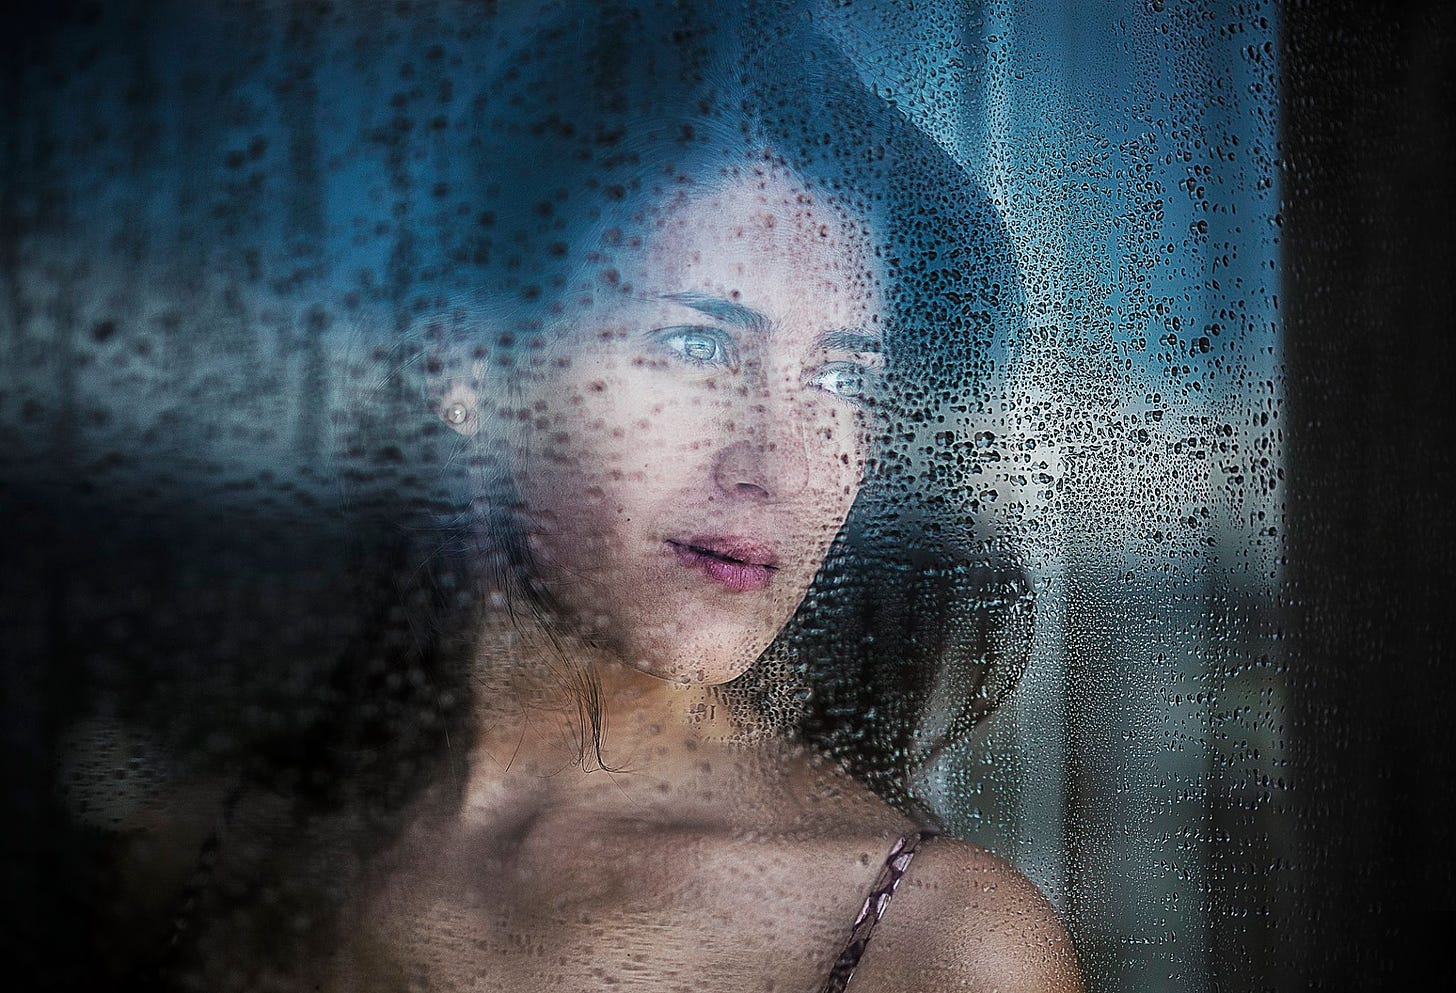 Dark haired woman looking through a rainy window with trepidation